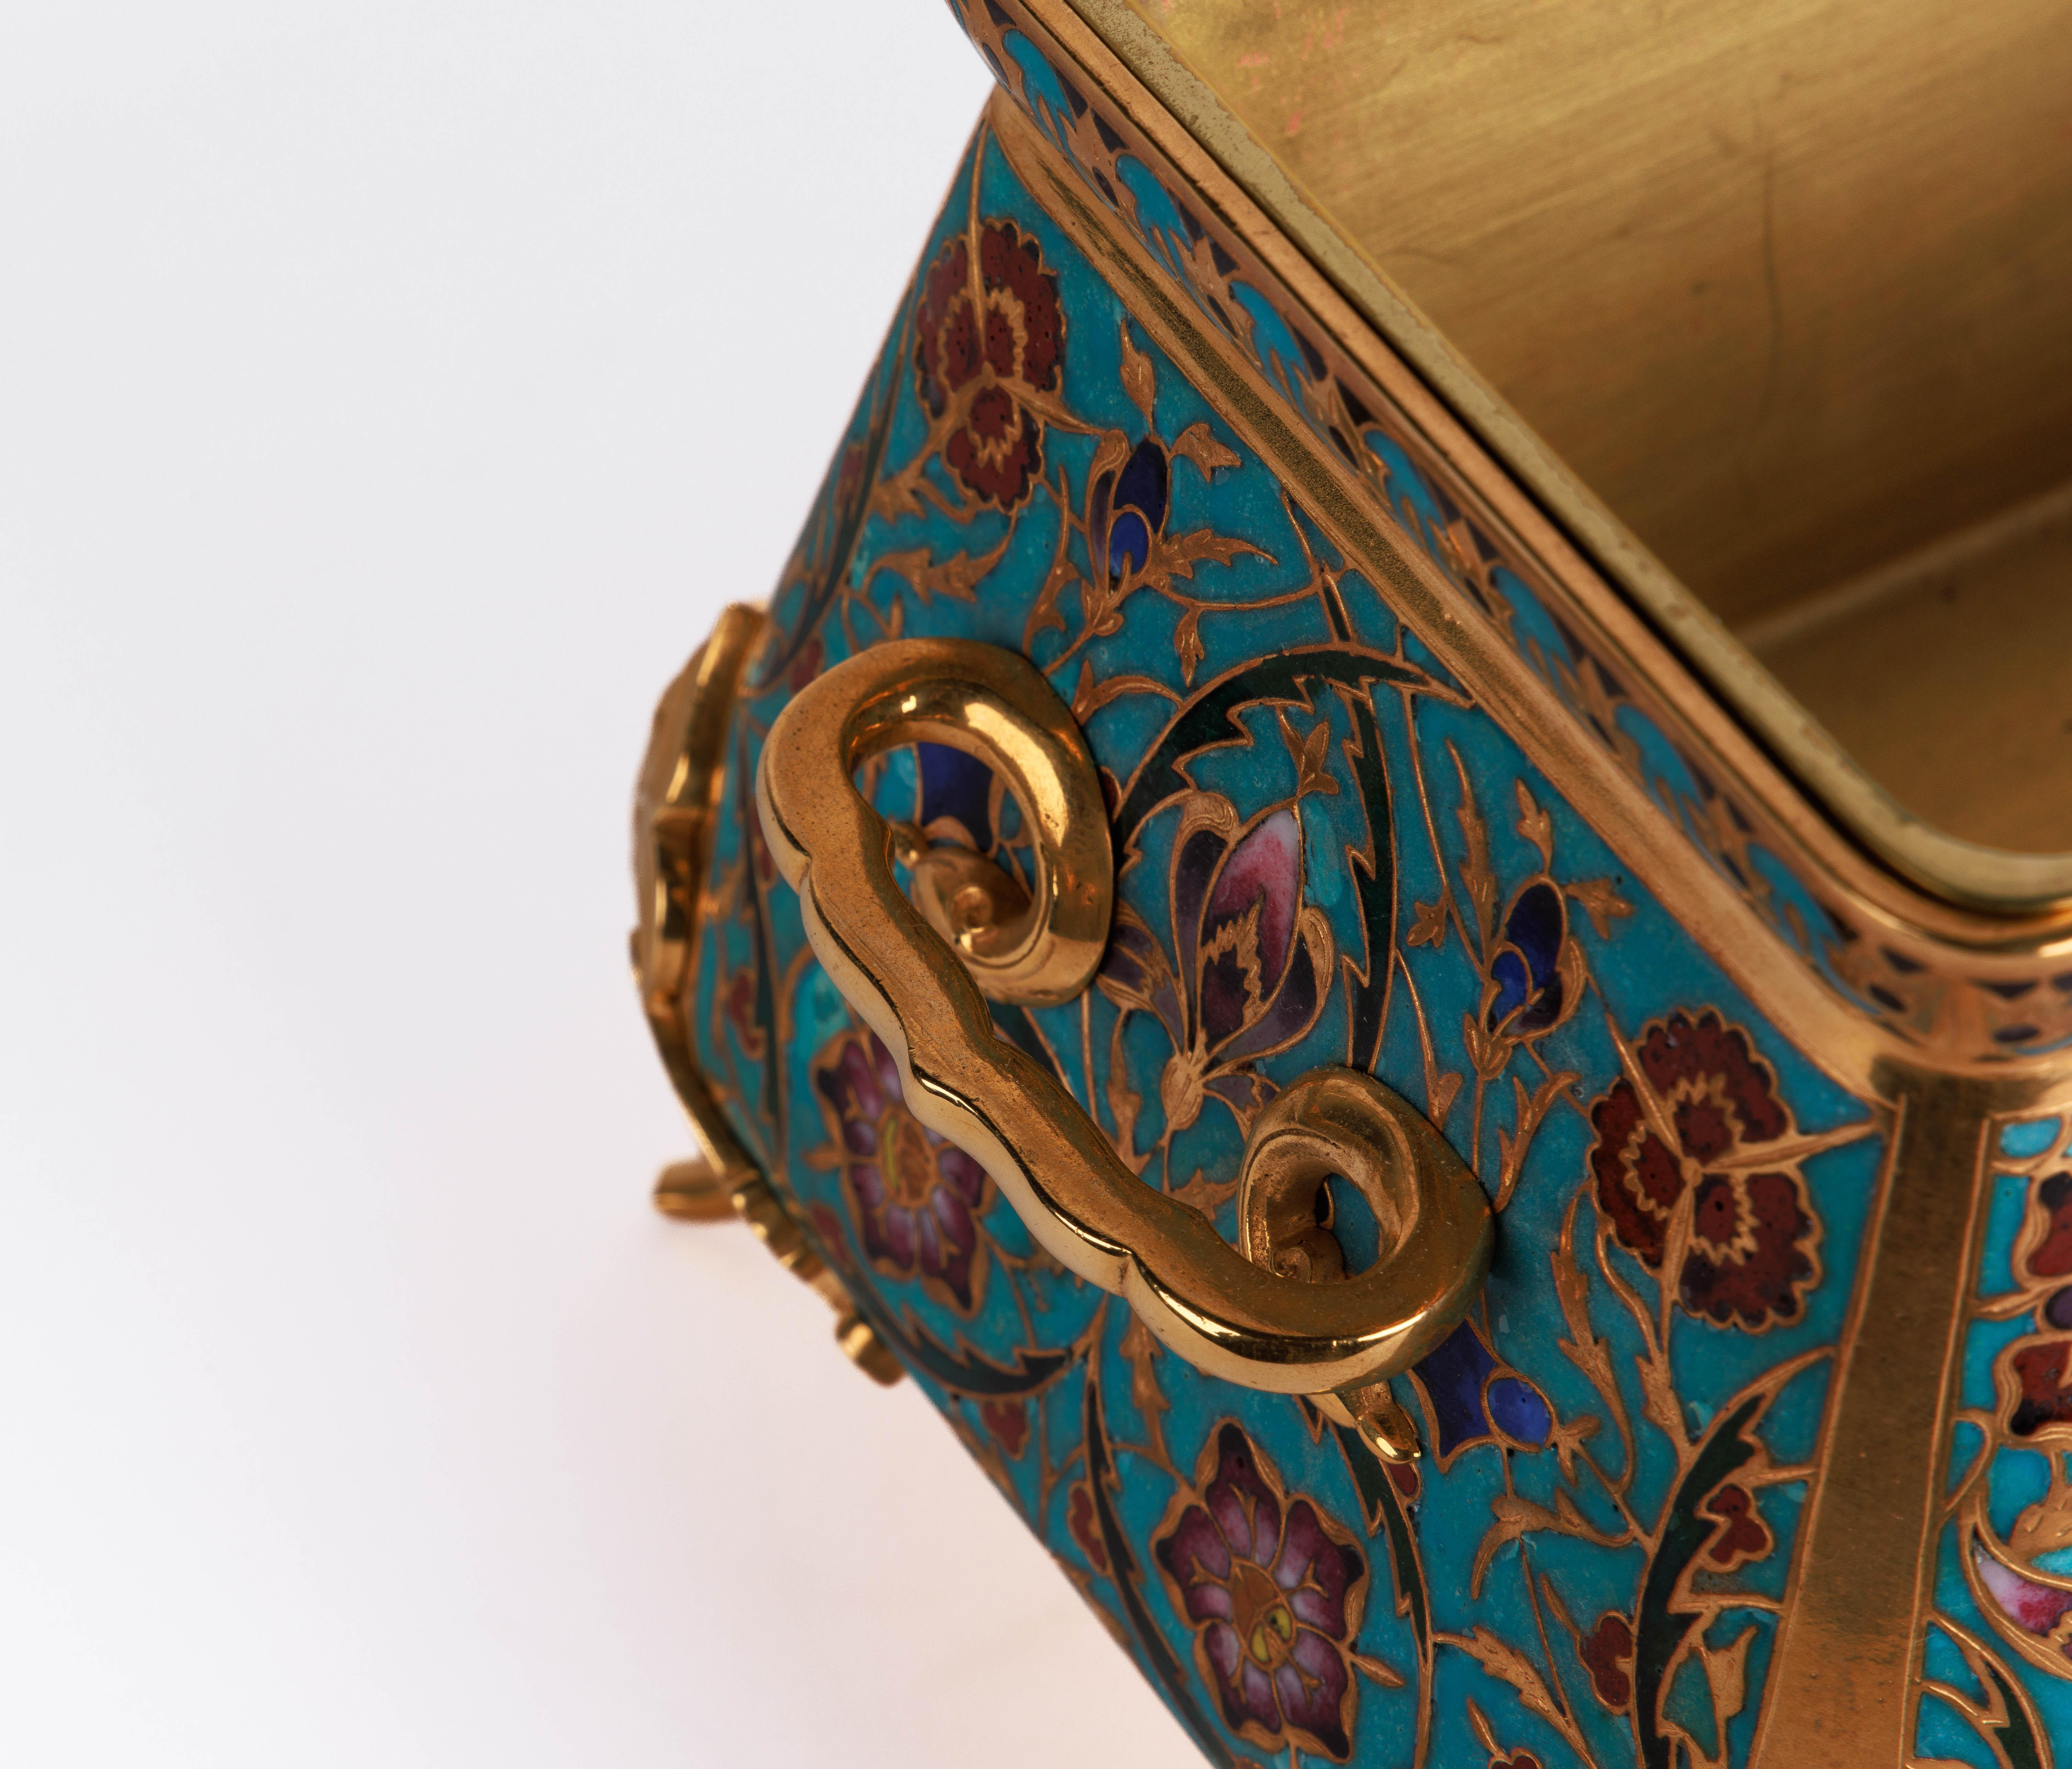 F. Barbedienne, A Suite of Three French Ormolu and Champleve Enamel Jardinieres  In Good Condition For Sale In New York, NY